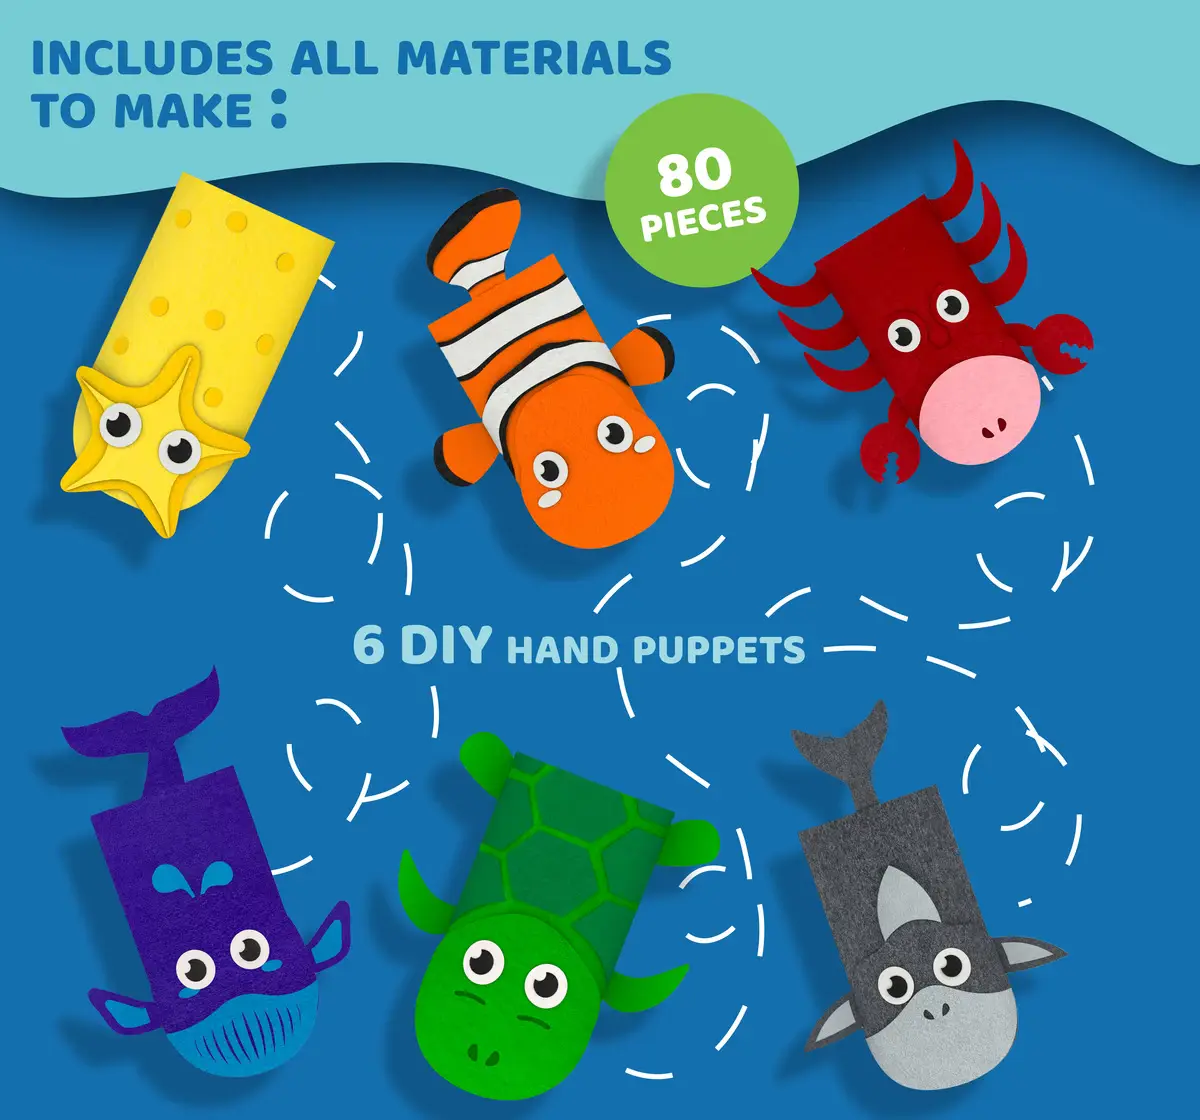 Jack In The Box Hand Puppet Sea Animal DIY Arts and Craft Kit for Kids 6-in-1 For Kids of Age 3Y+, Multicolour